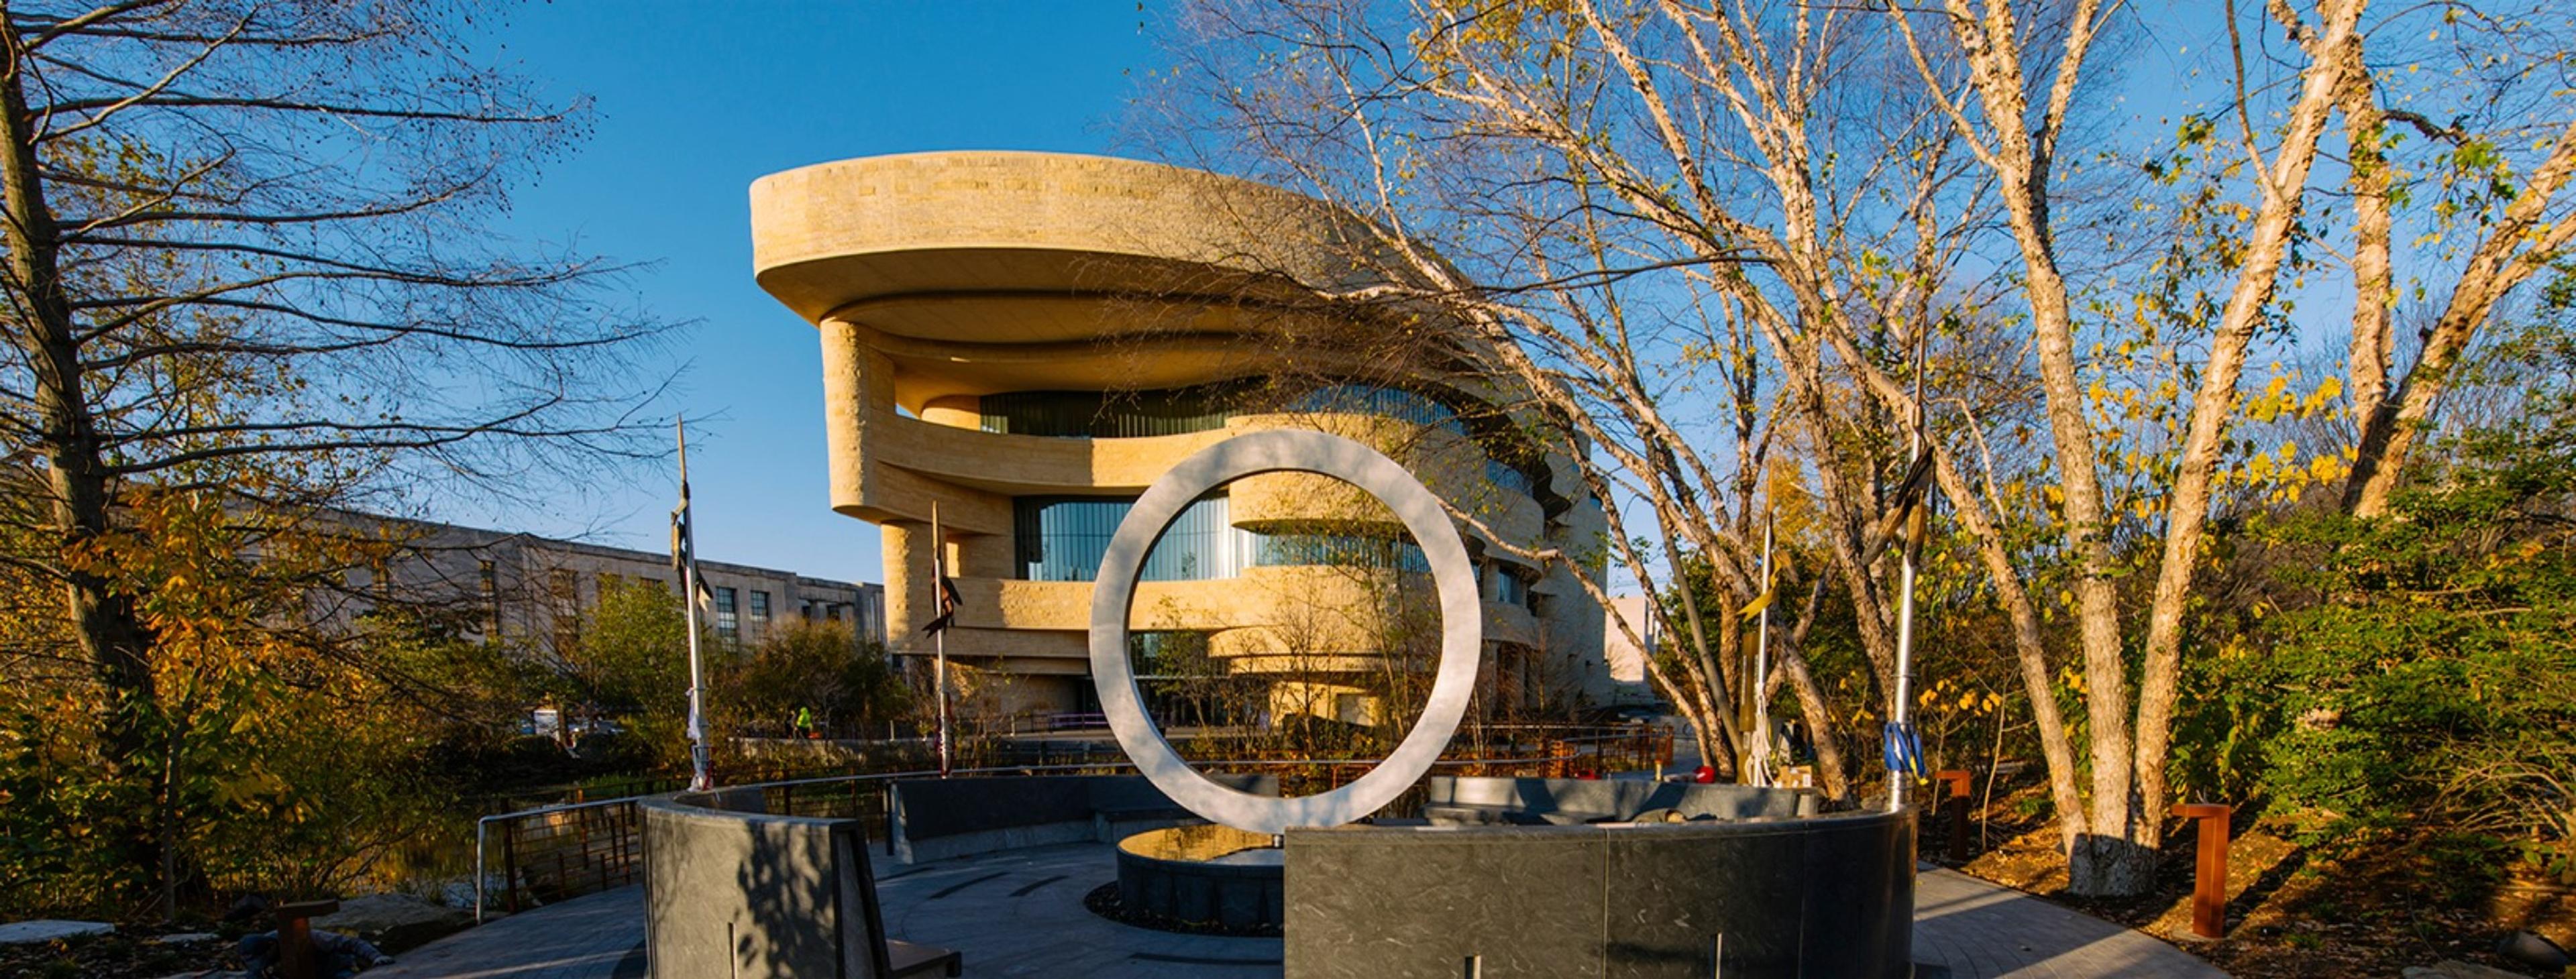 National Museum of the American Indian - Washington